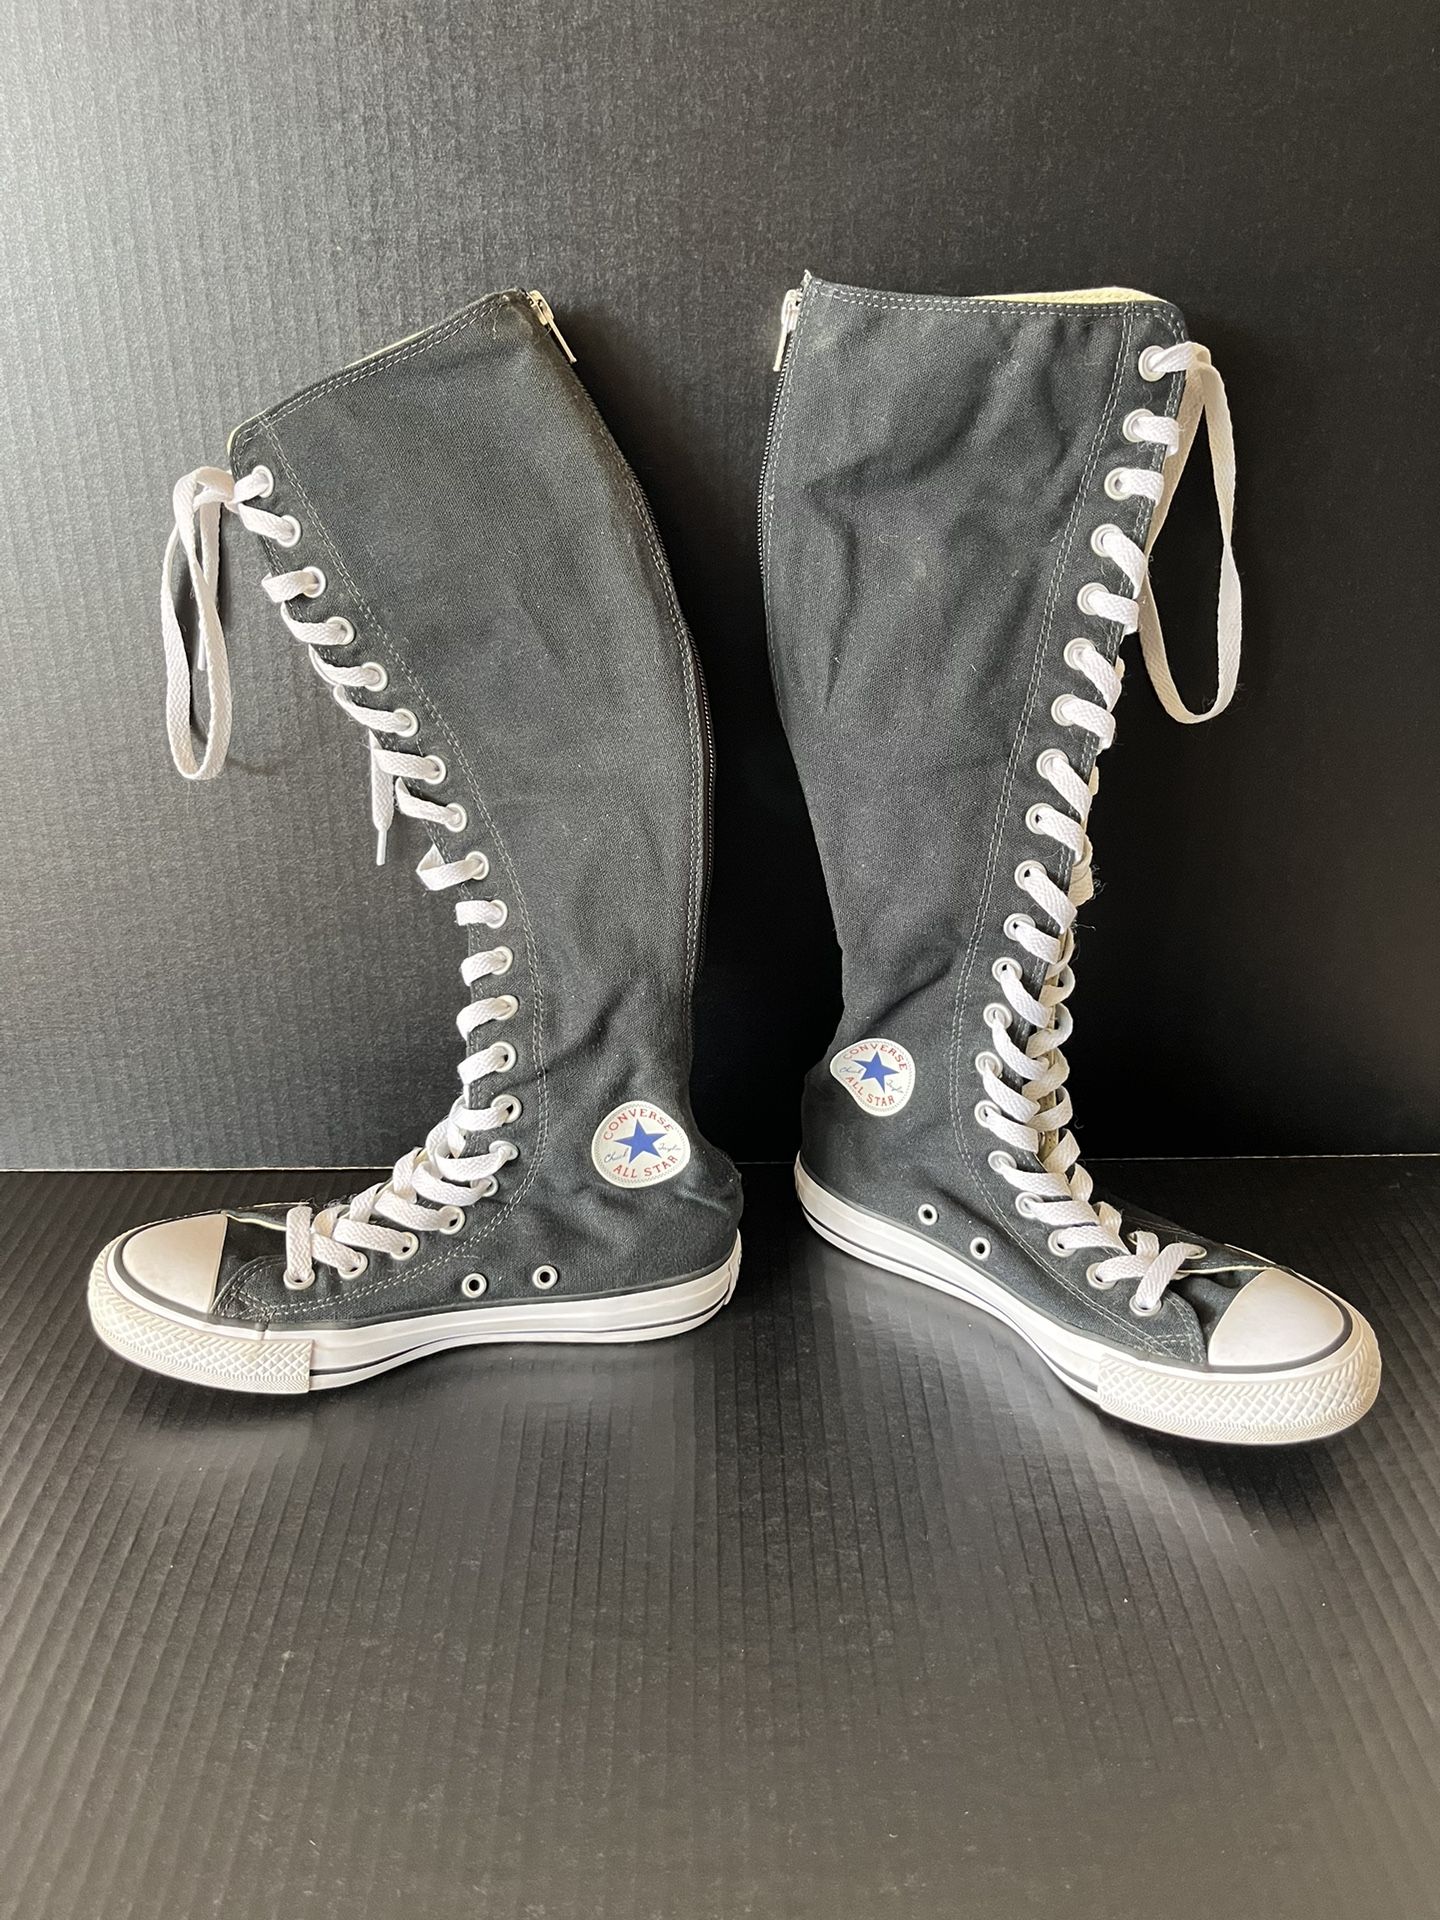 Converse Chuck Taylor All Star Knee High Sneakers 